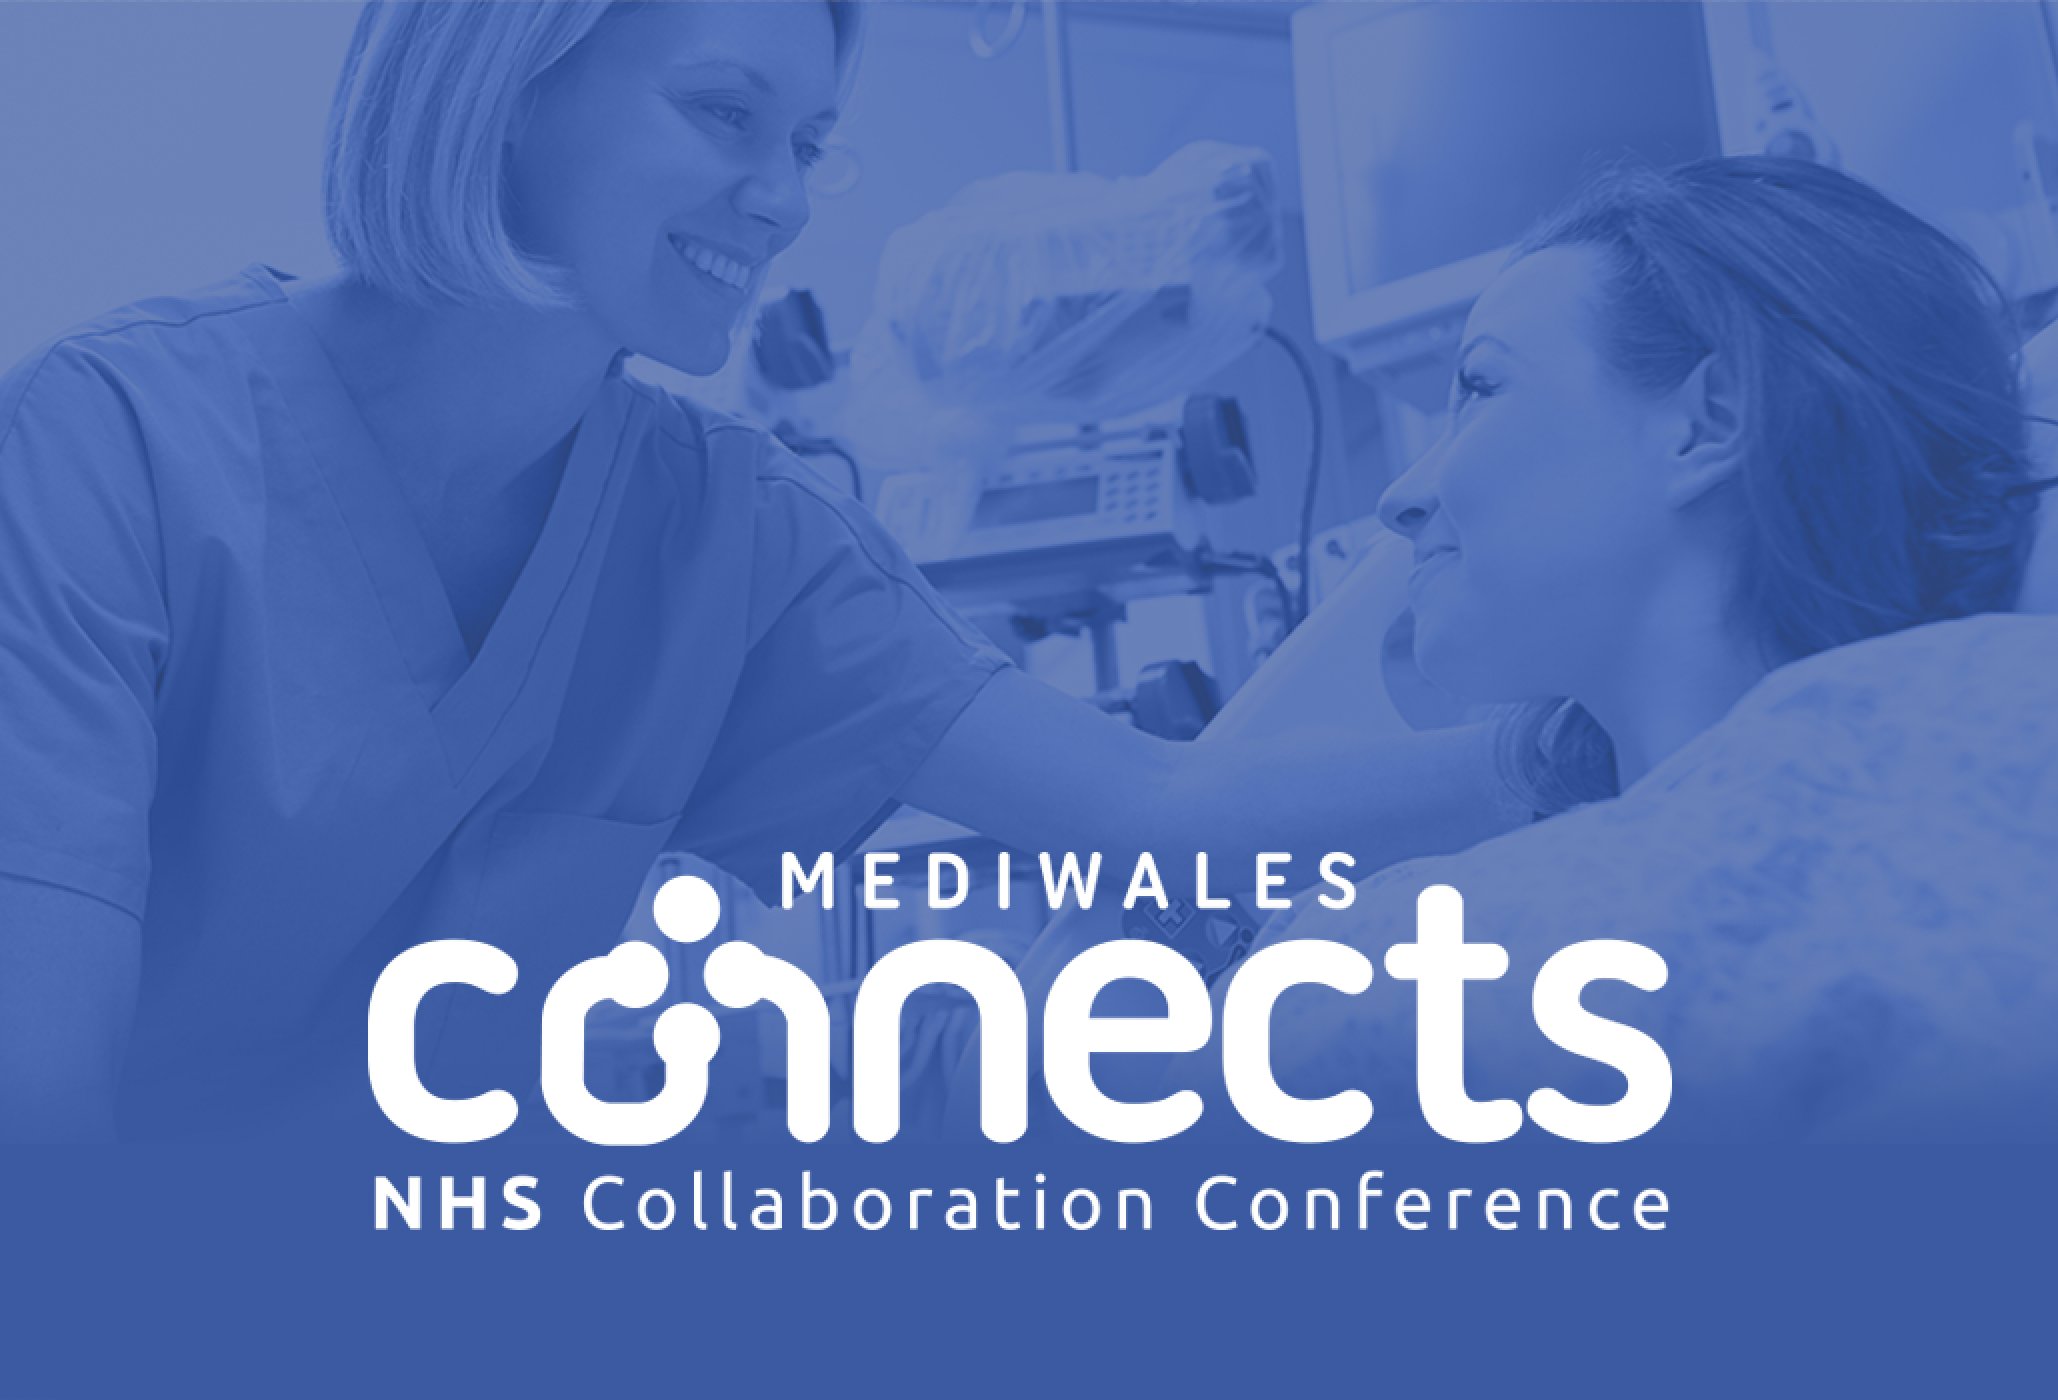 MediWales Connects NHS Collaborative Conference